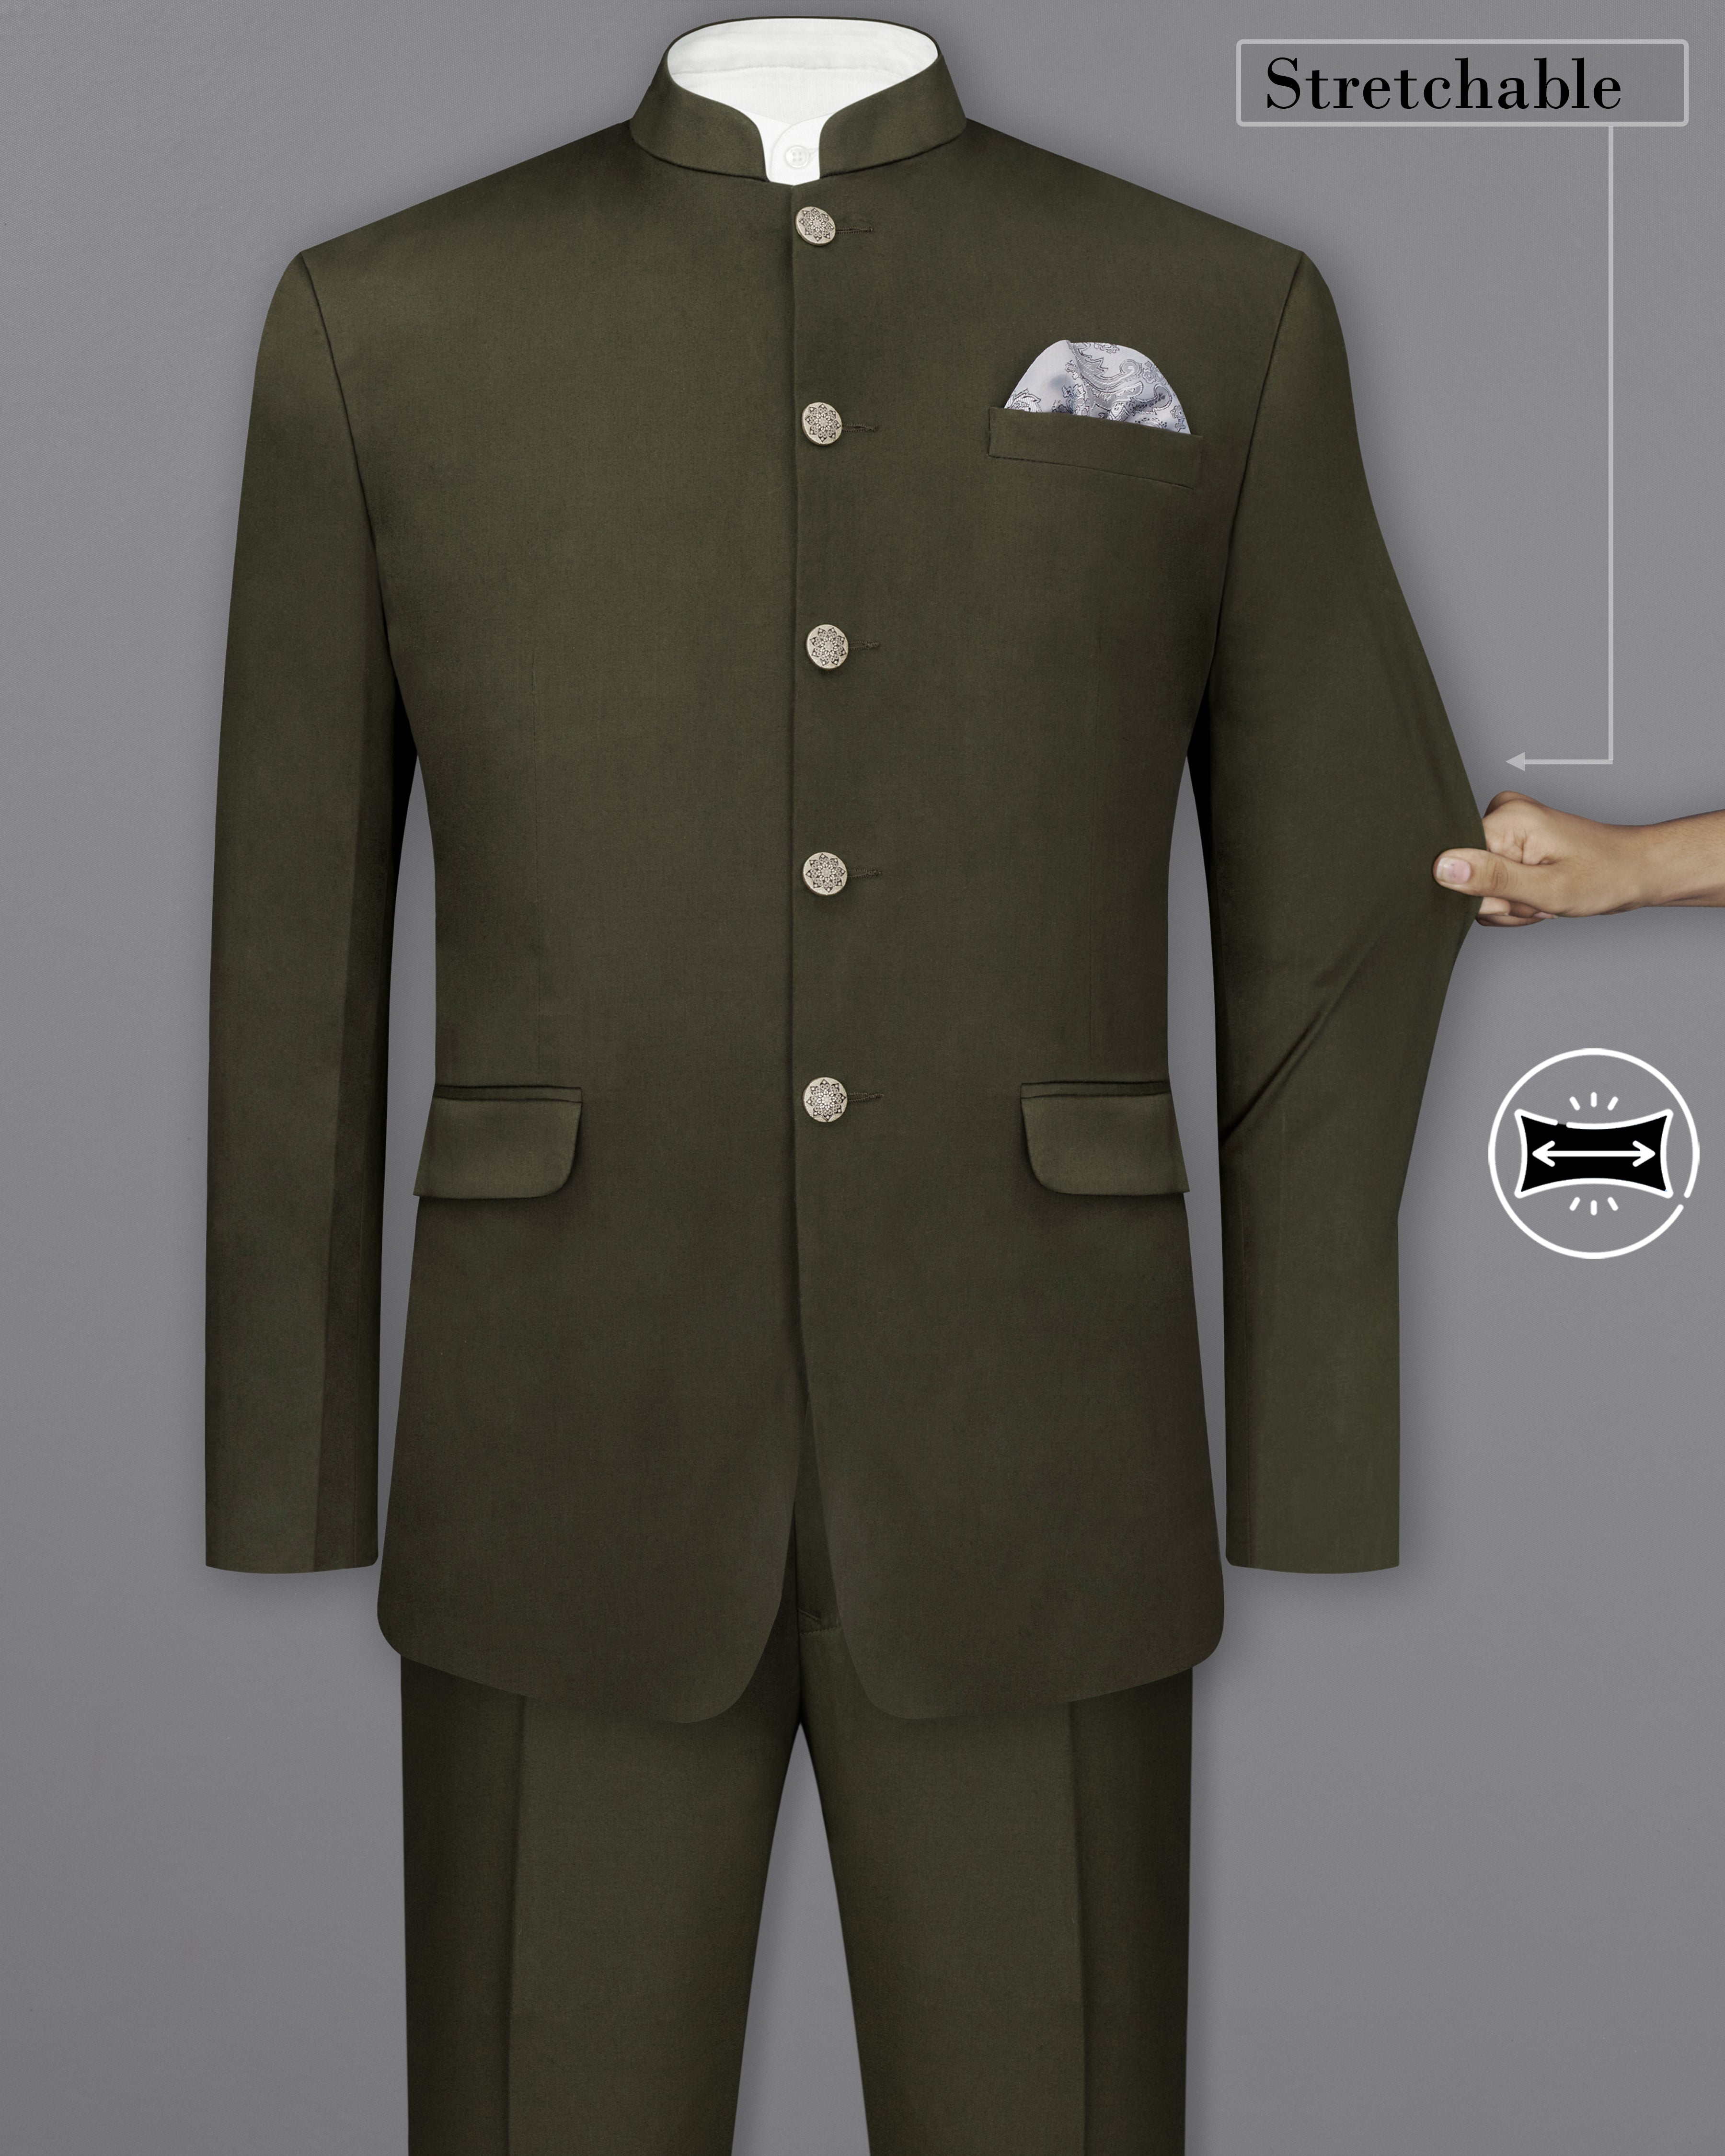 Taupe Green Solid Stretchable Premium Cotton Bandhgala Traveler Suit ST2644-BG-36, ST2644-BG-38, ST2644-BG-40, ST2644-BG-42, ST2644-BG-44, ST2644-BG-46, ST2644-BG-48, ST2644-BG-50, ST2644-BG-52, ST2644-BG-54, ST2644-BG-56, ST2644-BG-58, ST2644-BG-60